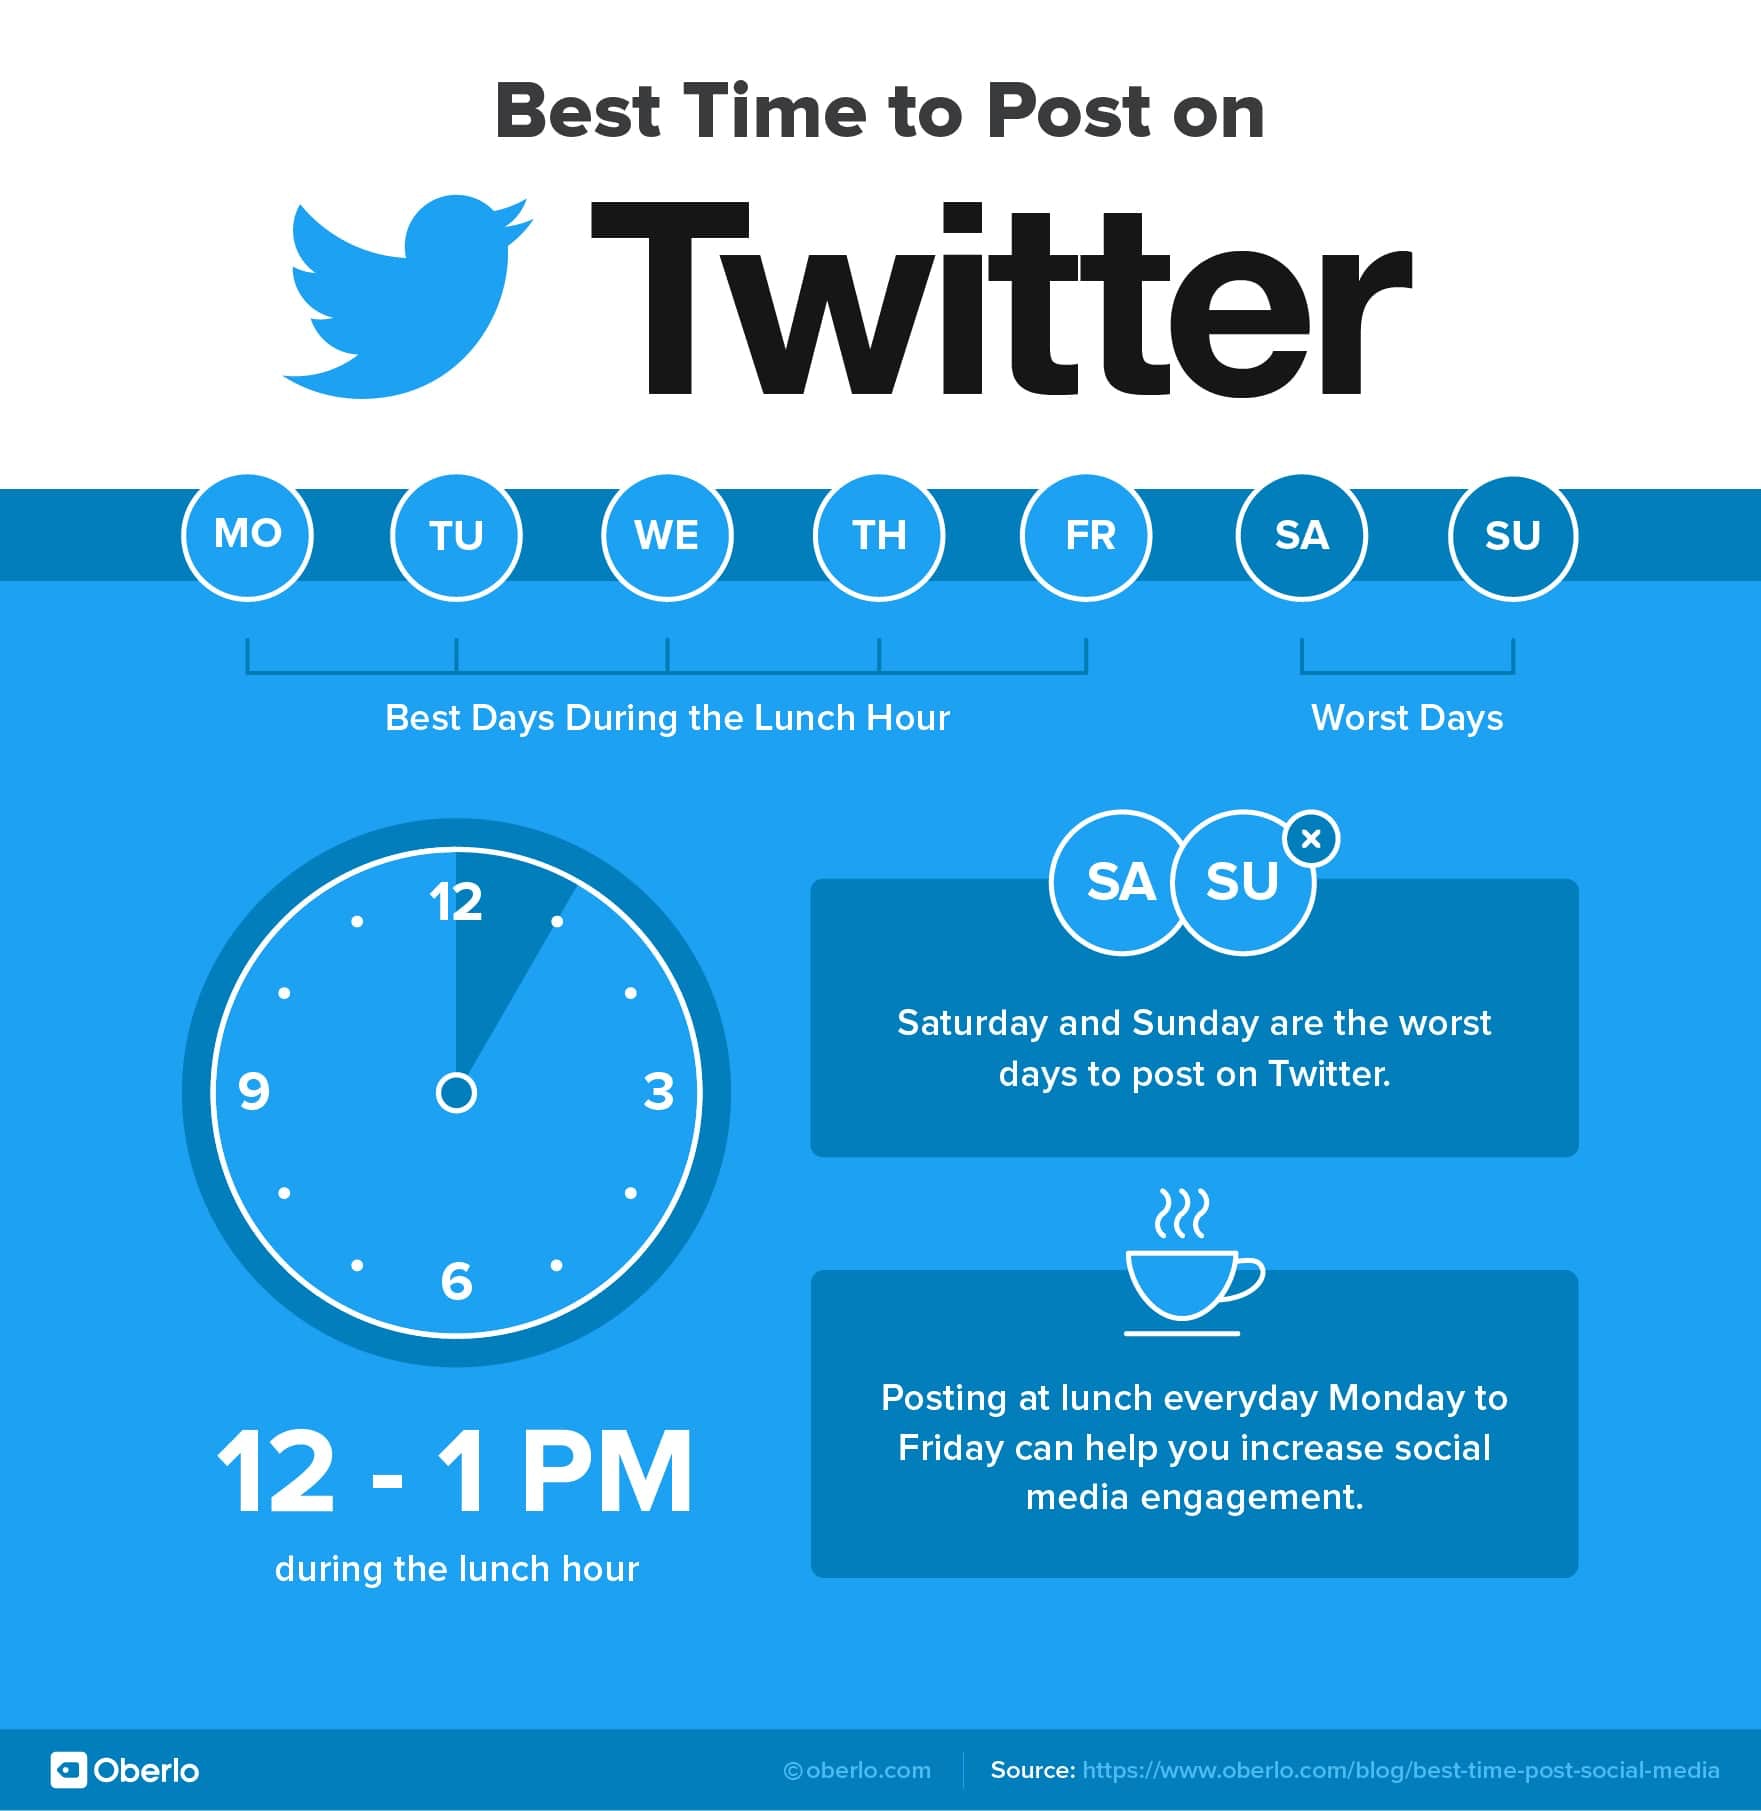 All about Twitter and how to use it for business to reach out more.